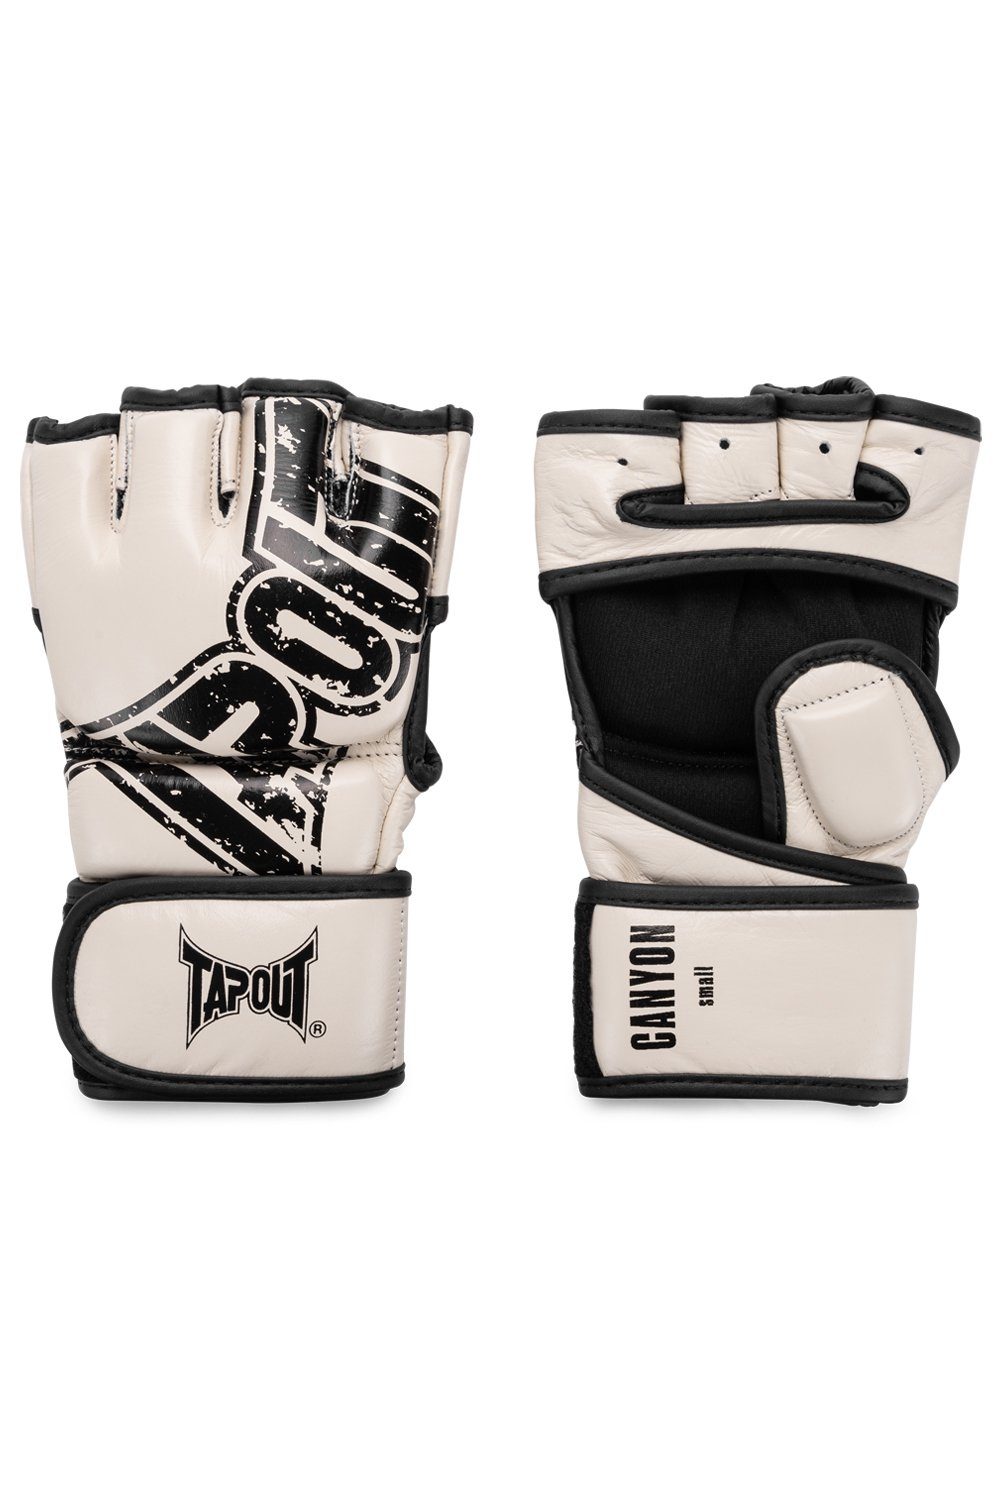 MMA-Handschuhe TAPOUT CANYON